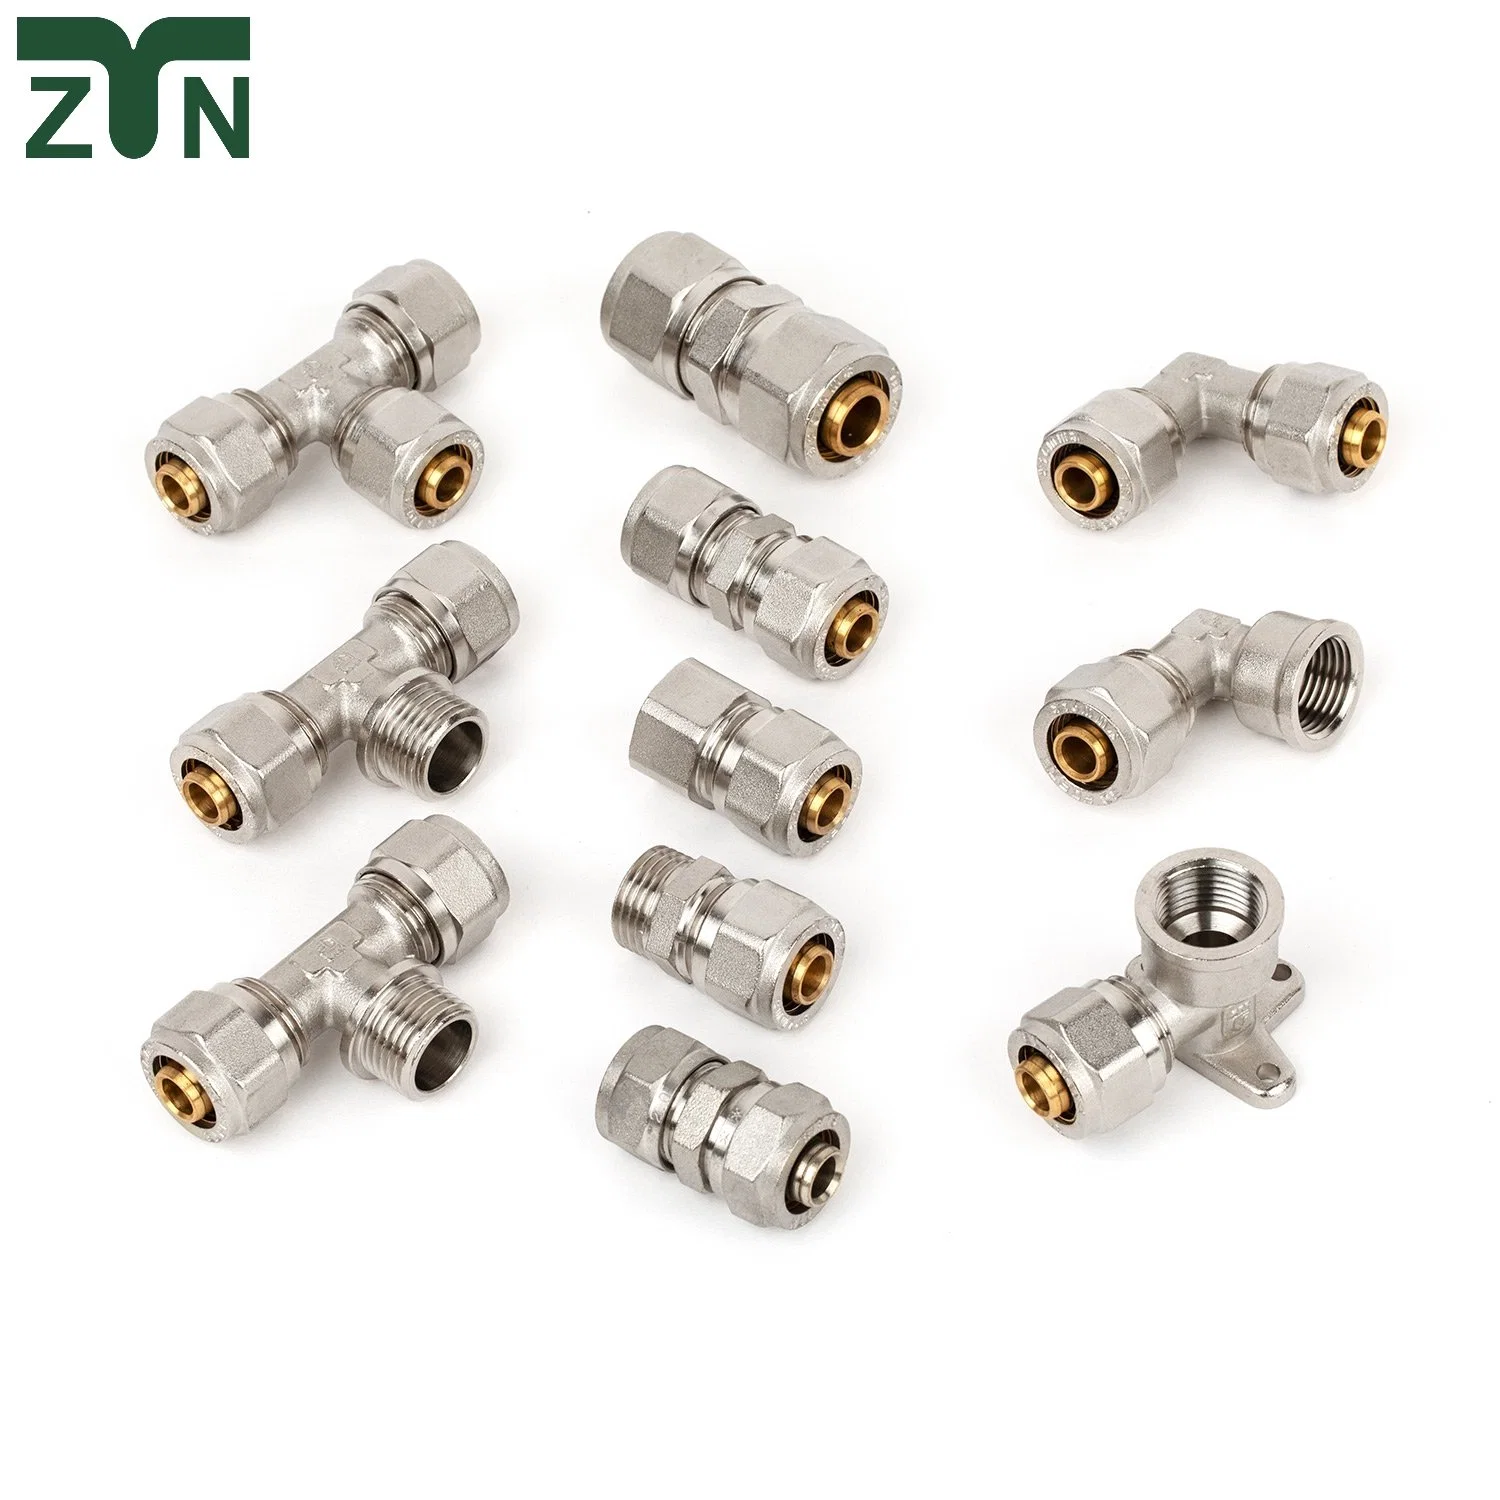 High quality/High cost performance  Brass Parts, Brass Machining Parts, Brass Machining Parts Metal Tee Fitting Sanitary Fittings Elbow Union Reducer Fitting Bathroom Pipe Fitting